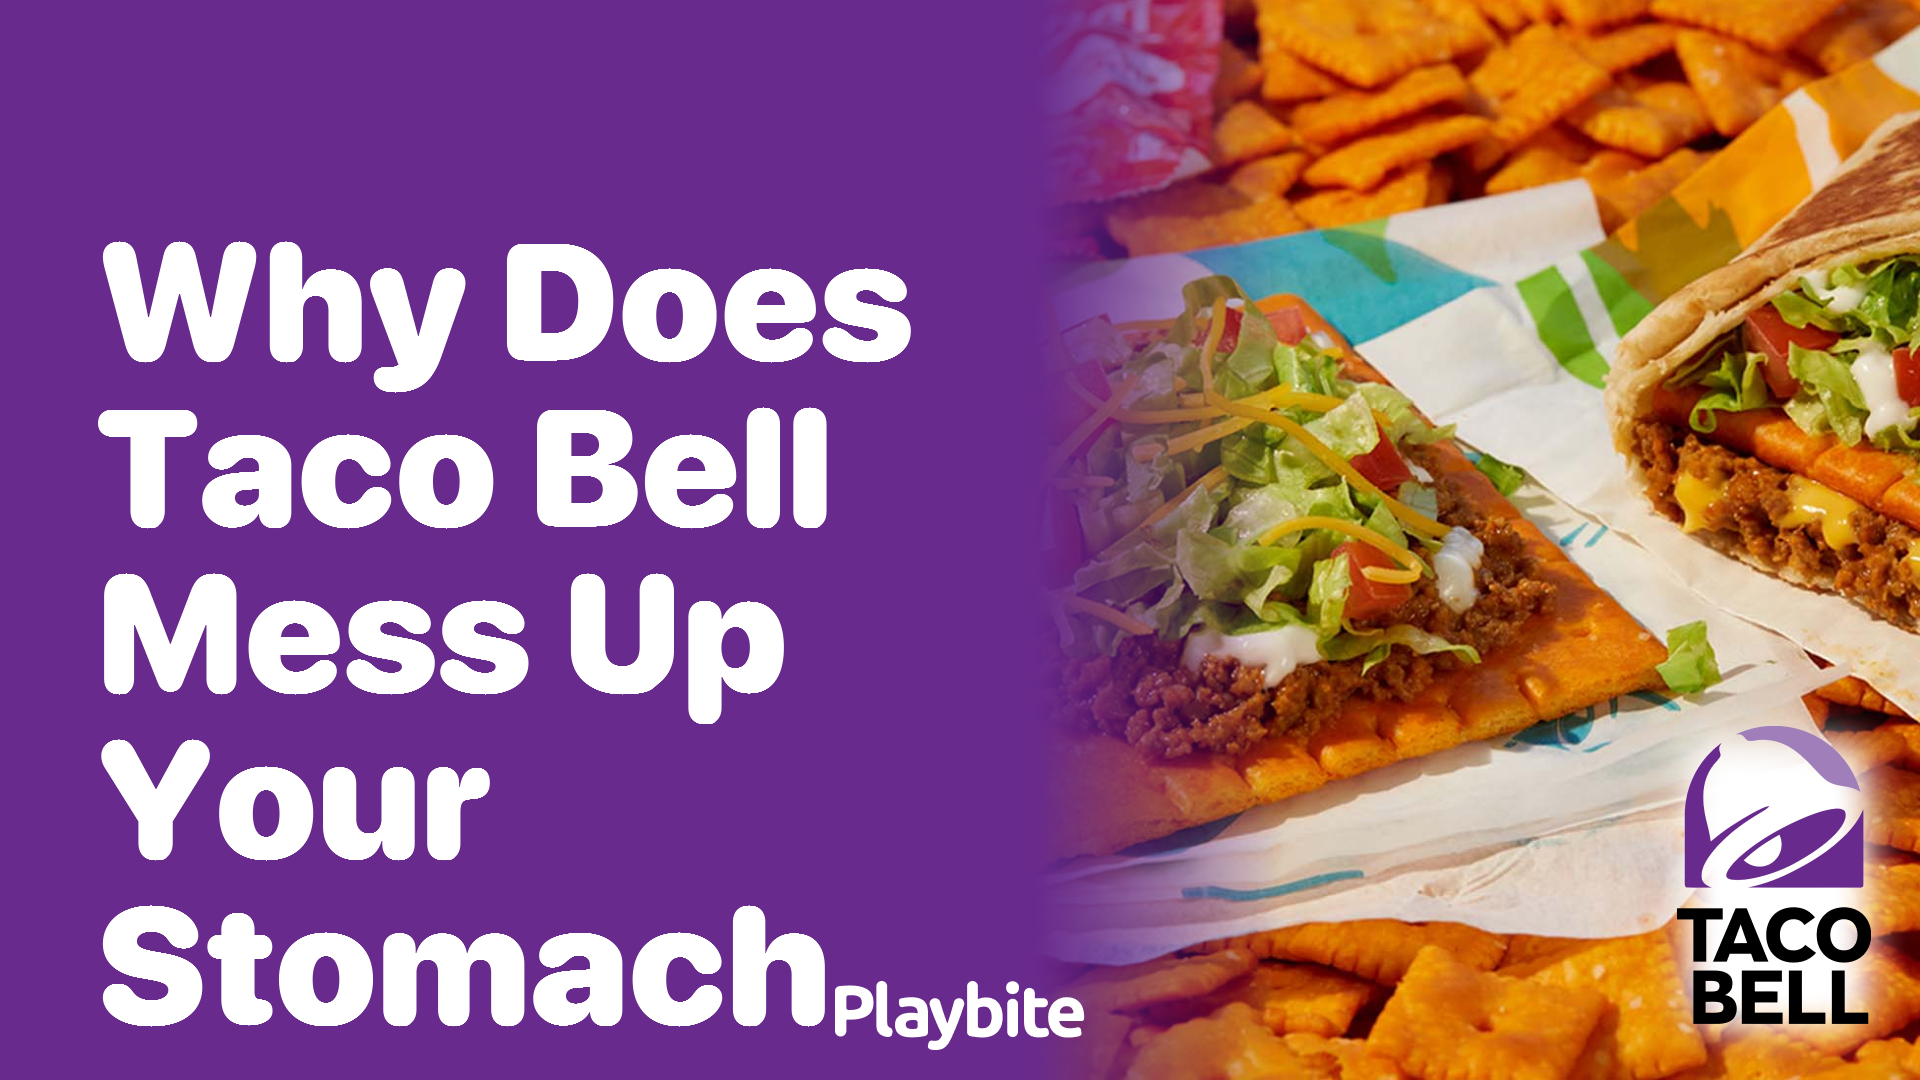 Why Does Taco Bell Mess Up Your Stomach? Unwrapping the Mystery